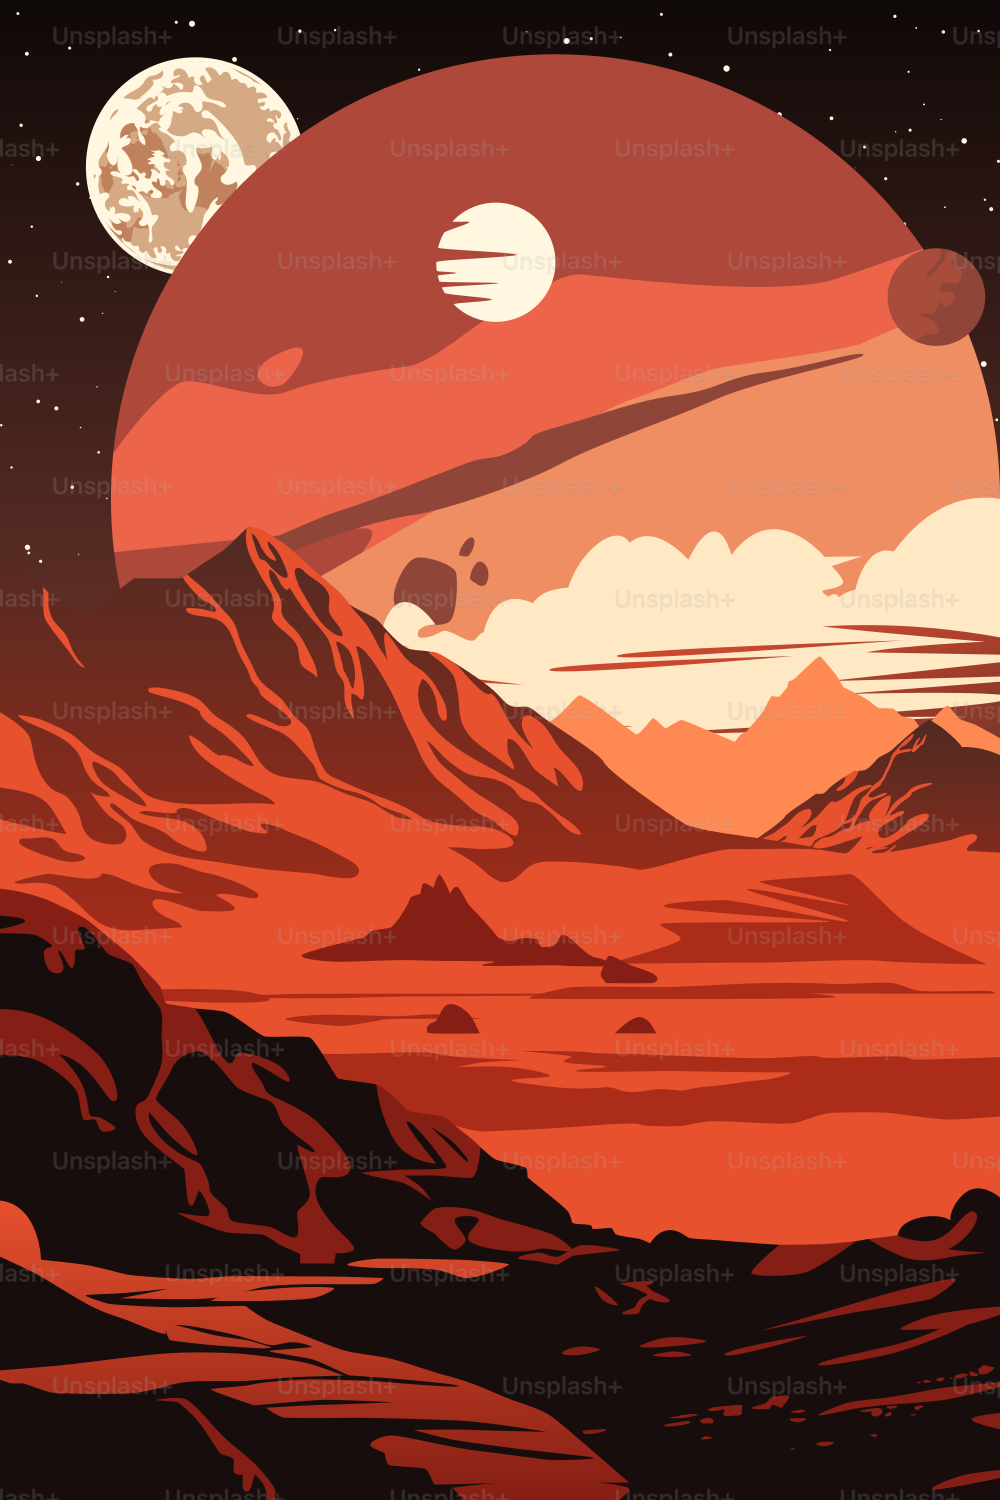 Space Poster. Surface of a Wild Planet. Strange Skies with Moons and Asteroids.